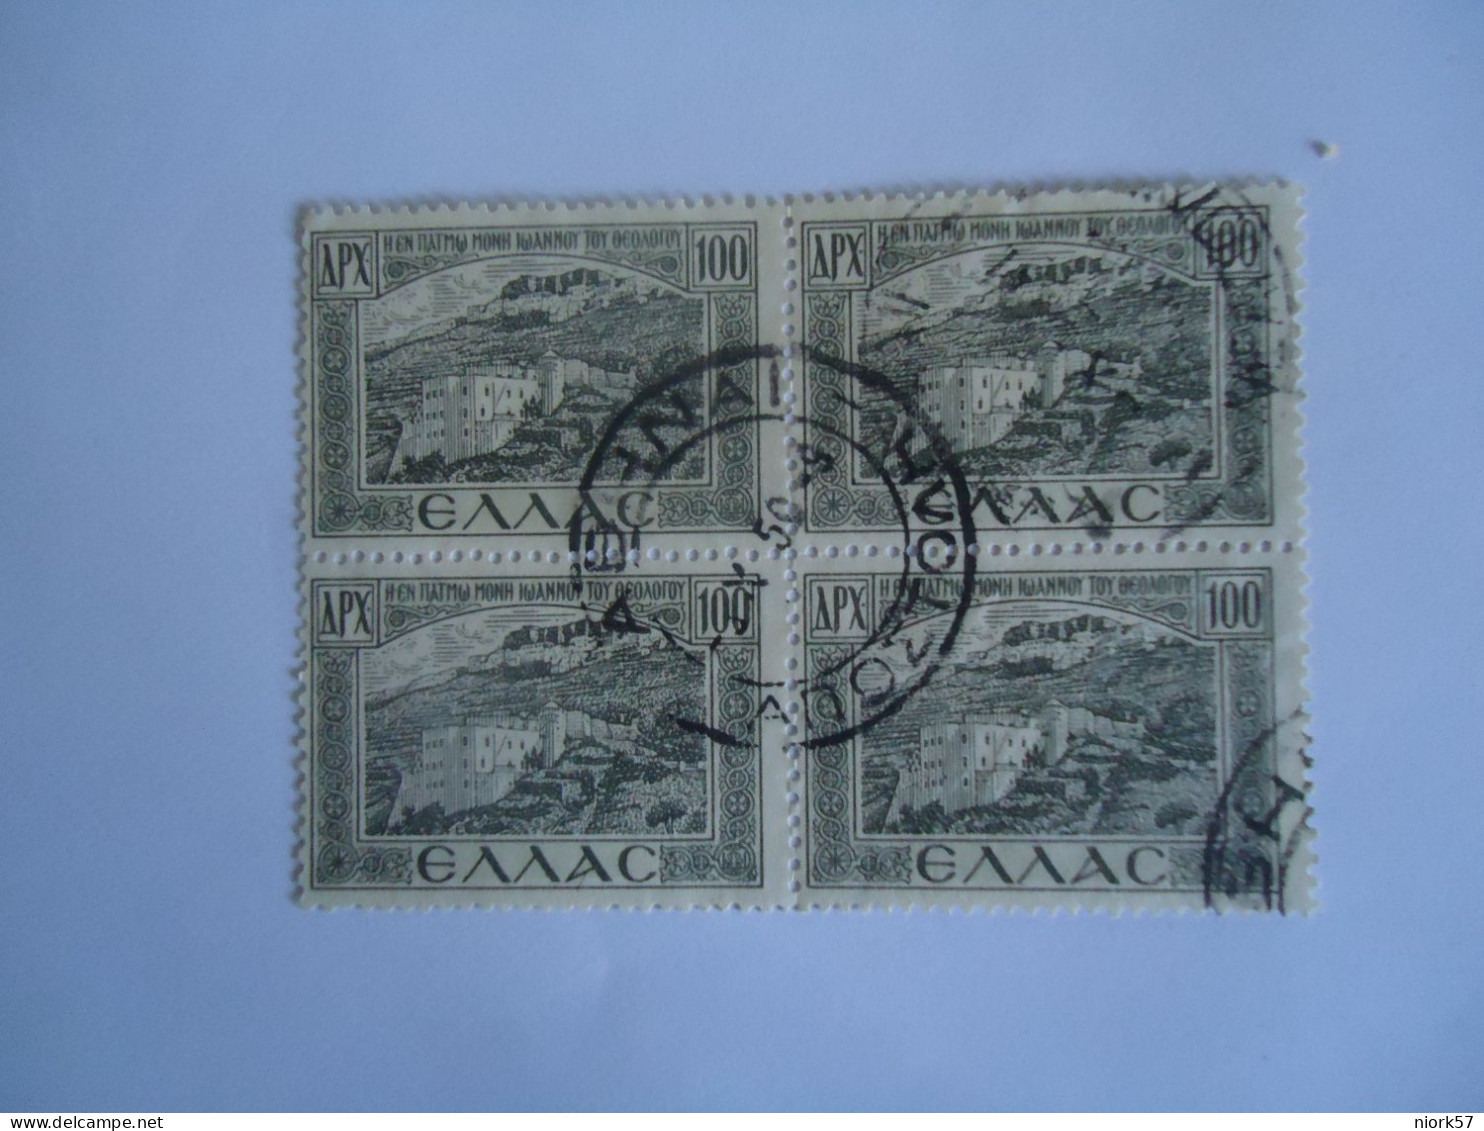 GREECE USED STAMPS 1937 ΤΟΠΙΑ   BLOCK OF 4 POSTMARK  ΑΘΗΝΑΙ - Gebraucht